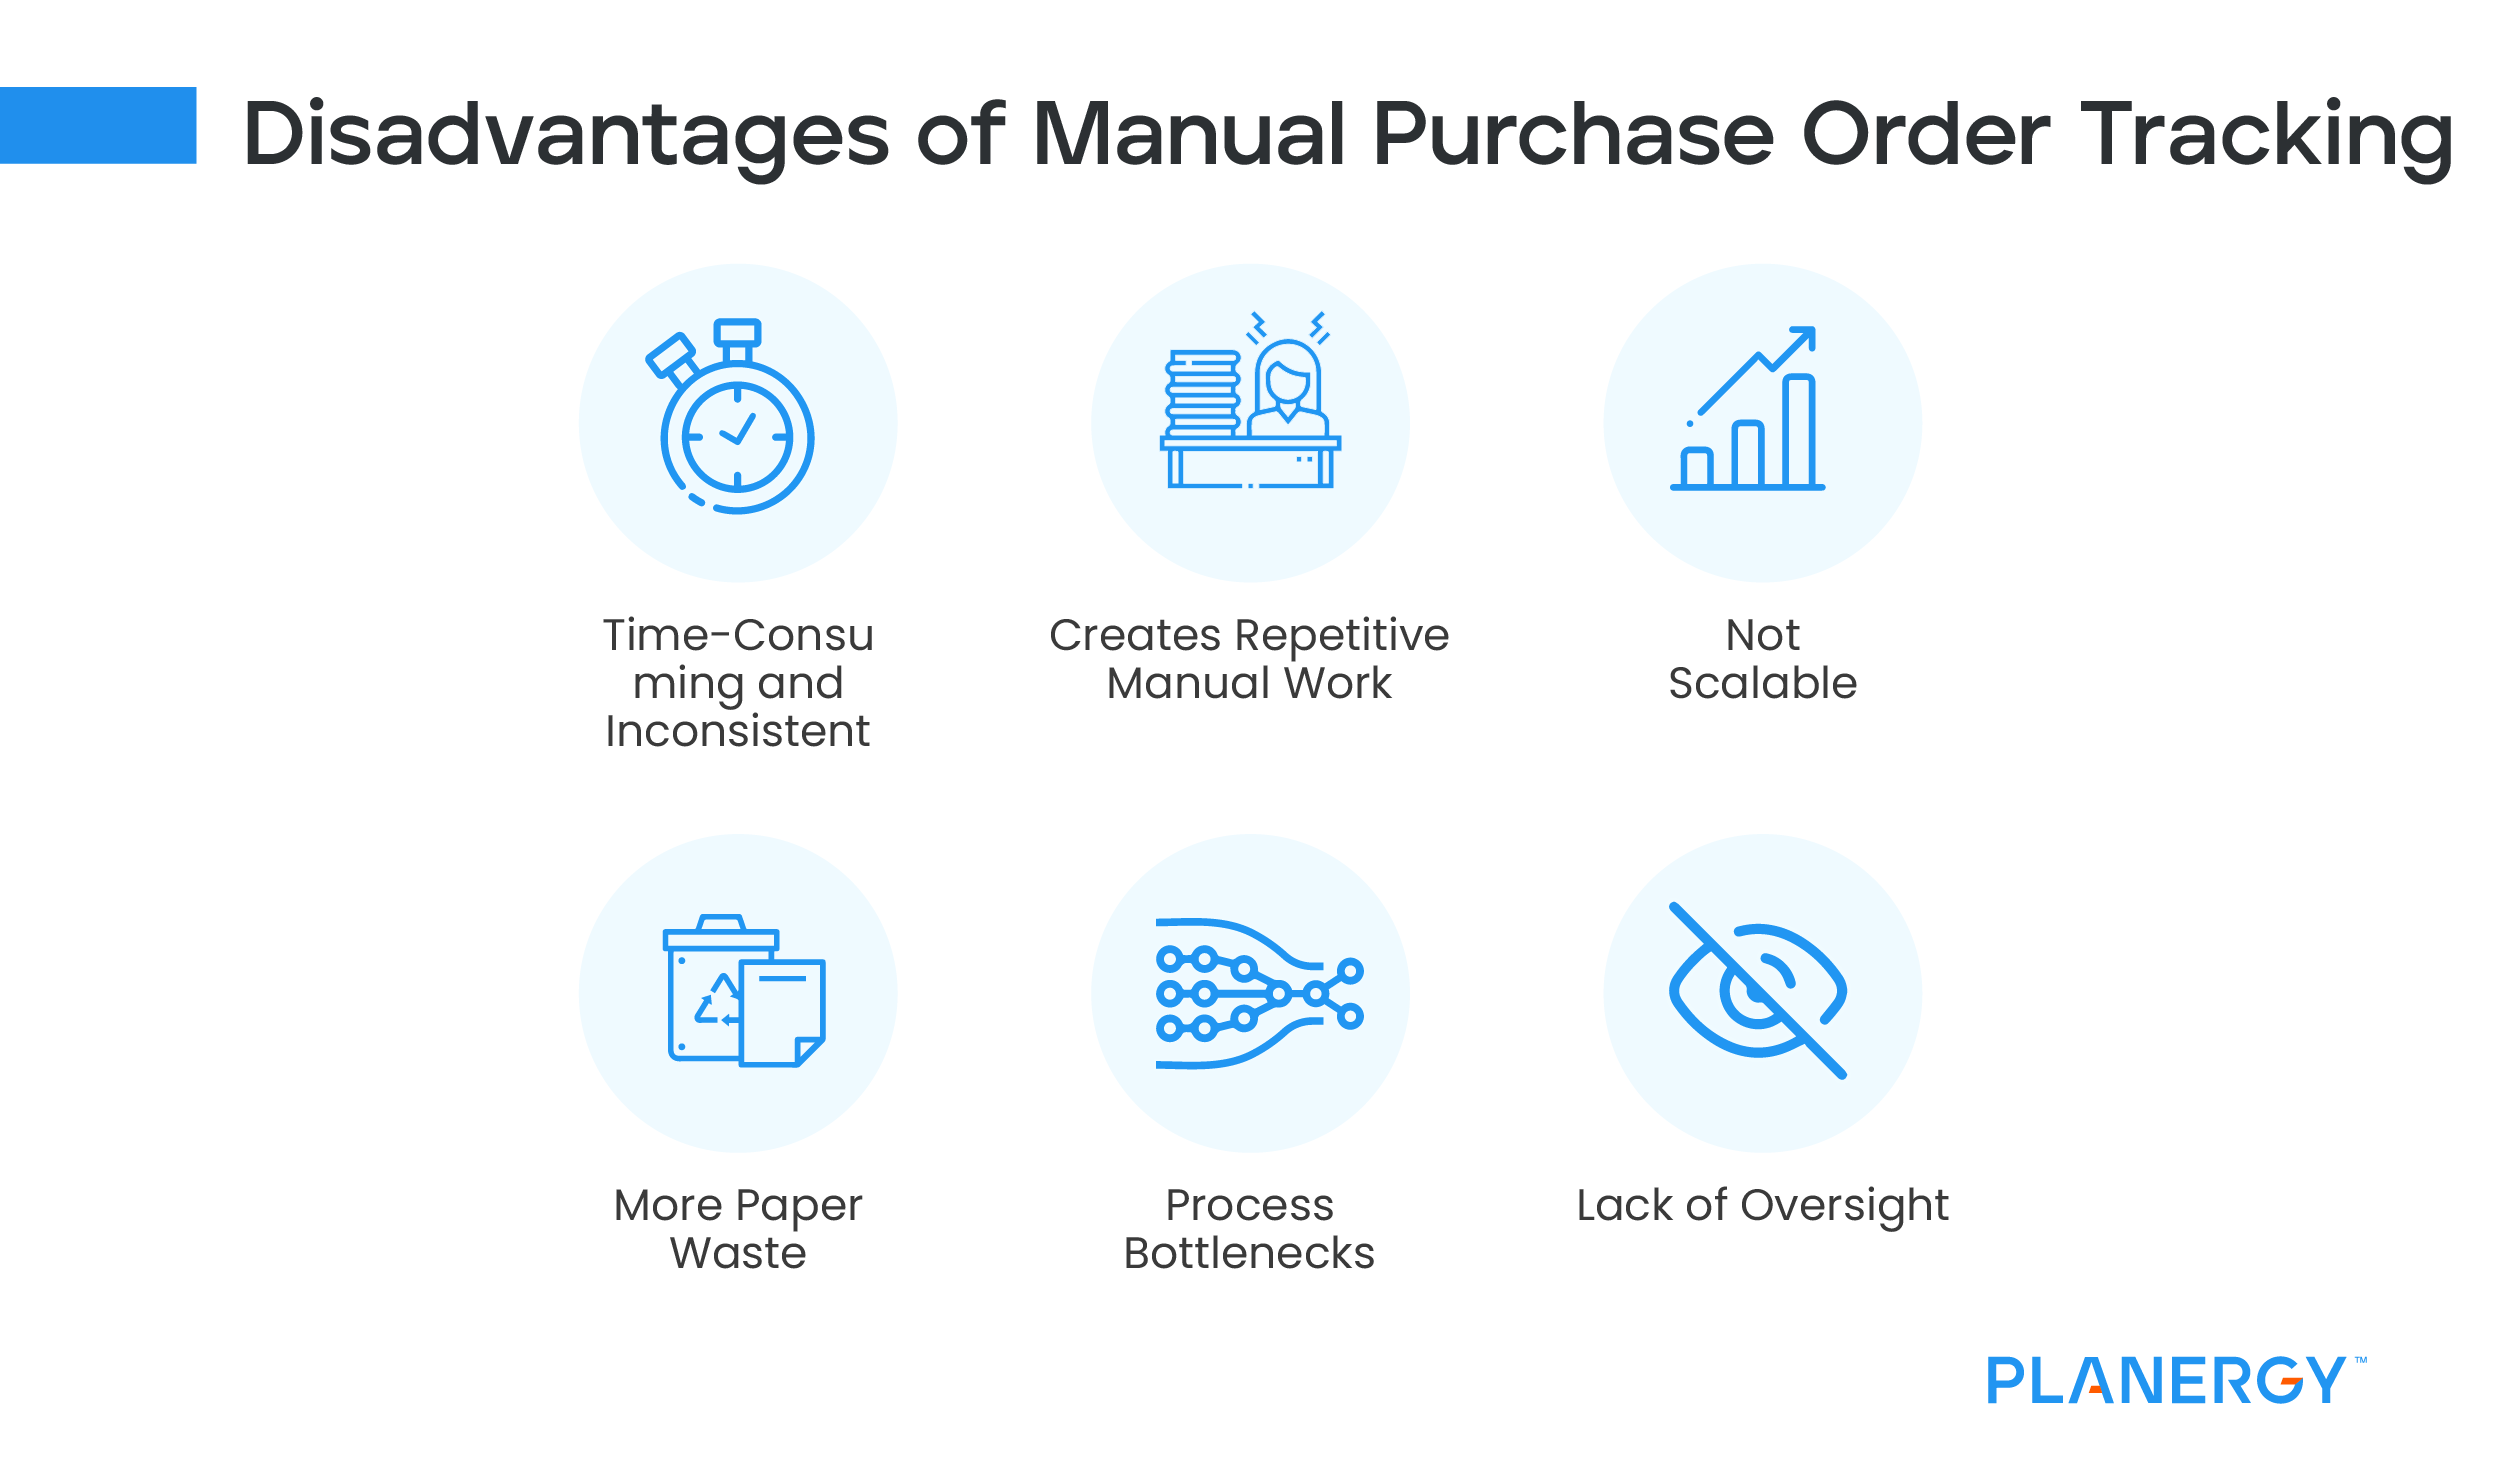 Disadvantages of Manual Purchase Order Tracking